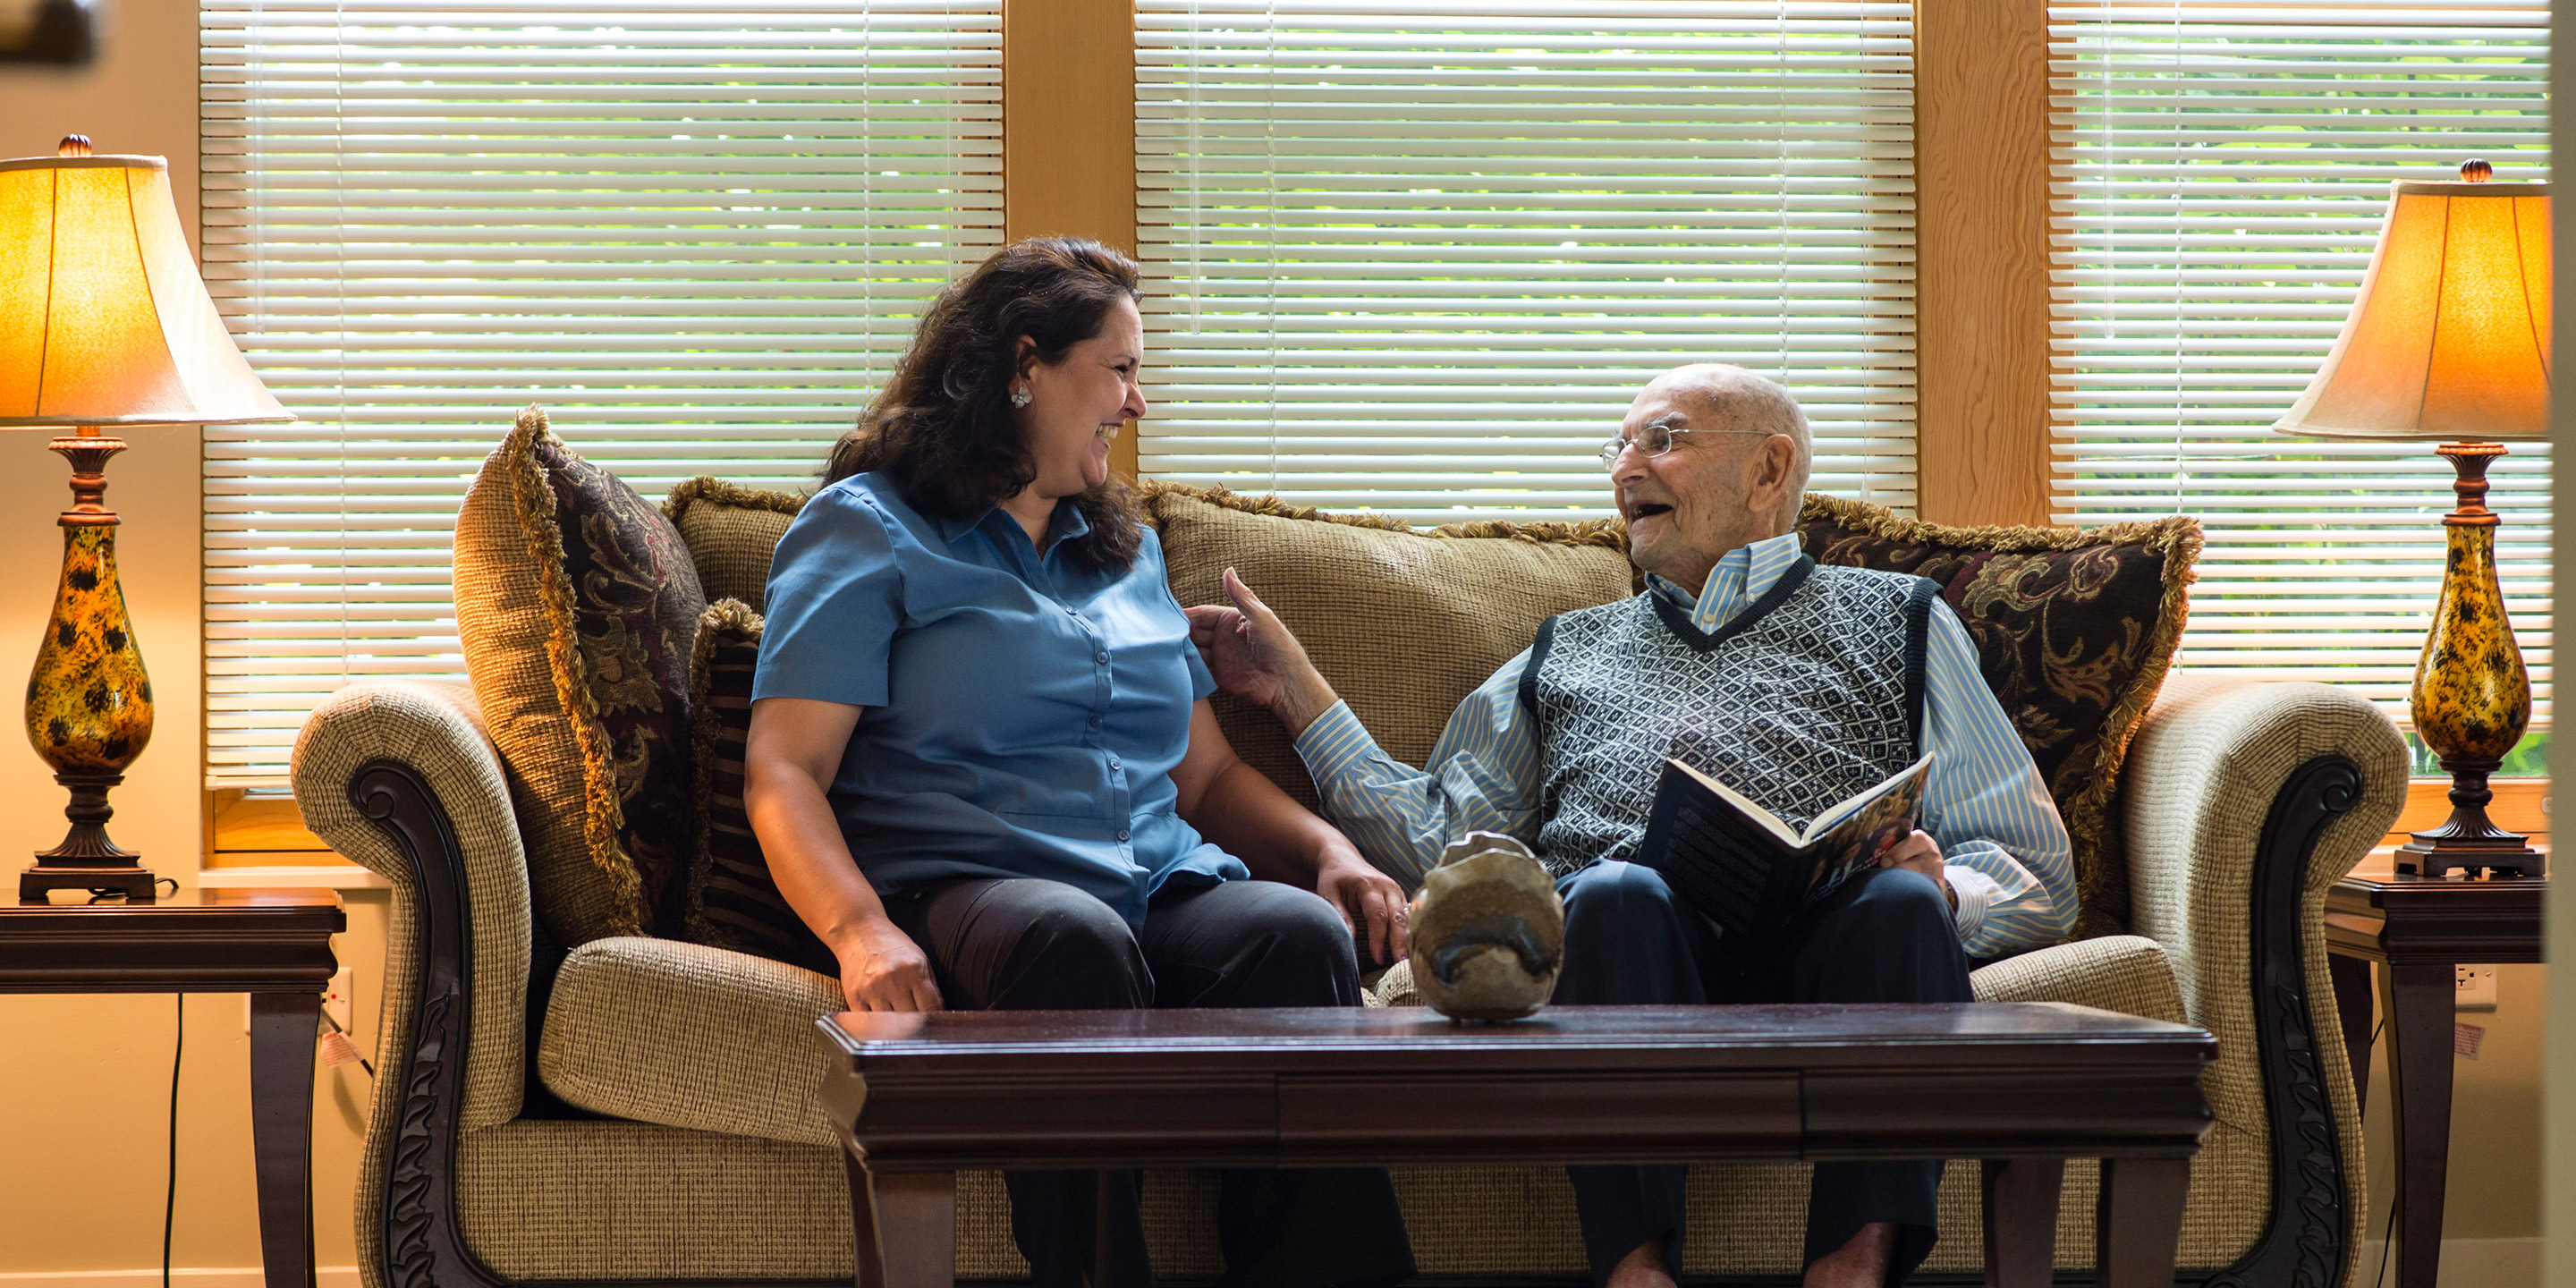 Assisted Living vs. Independent Living: 5 differences